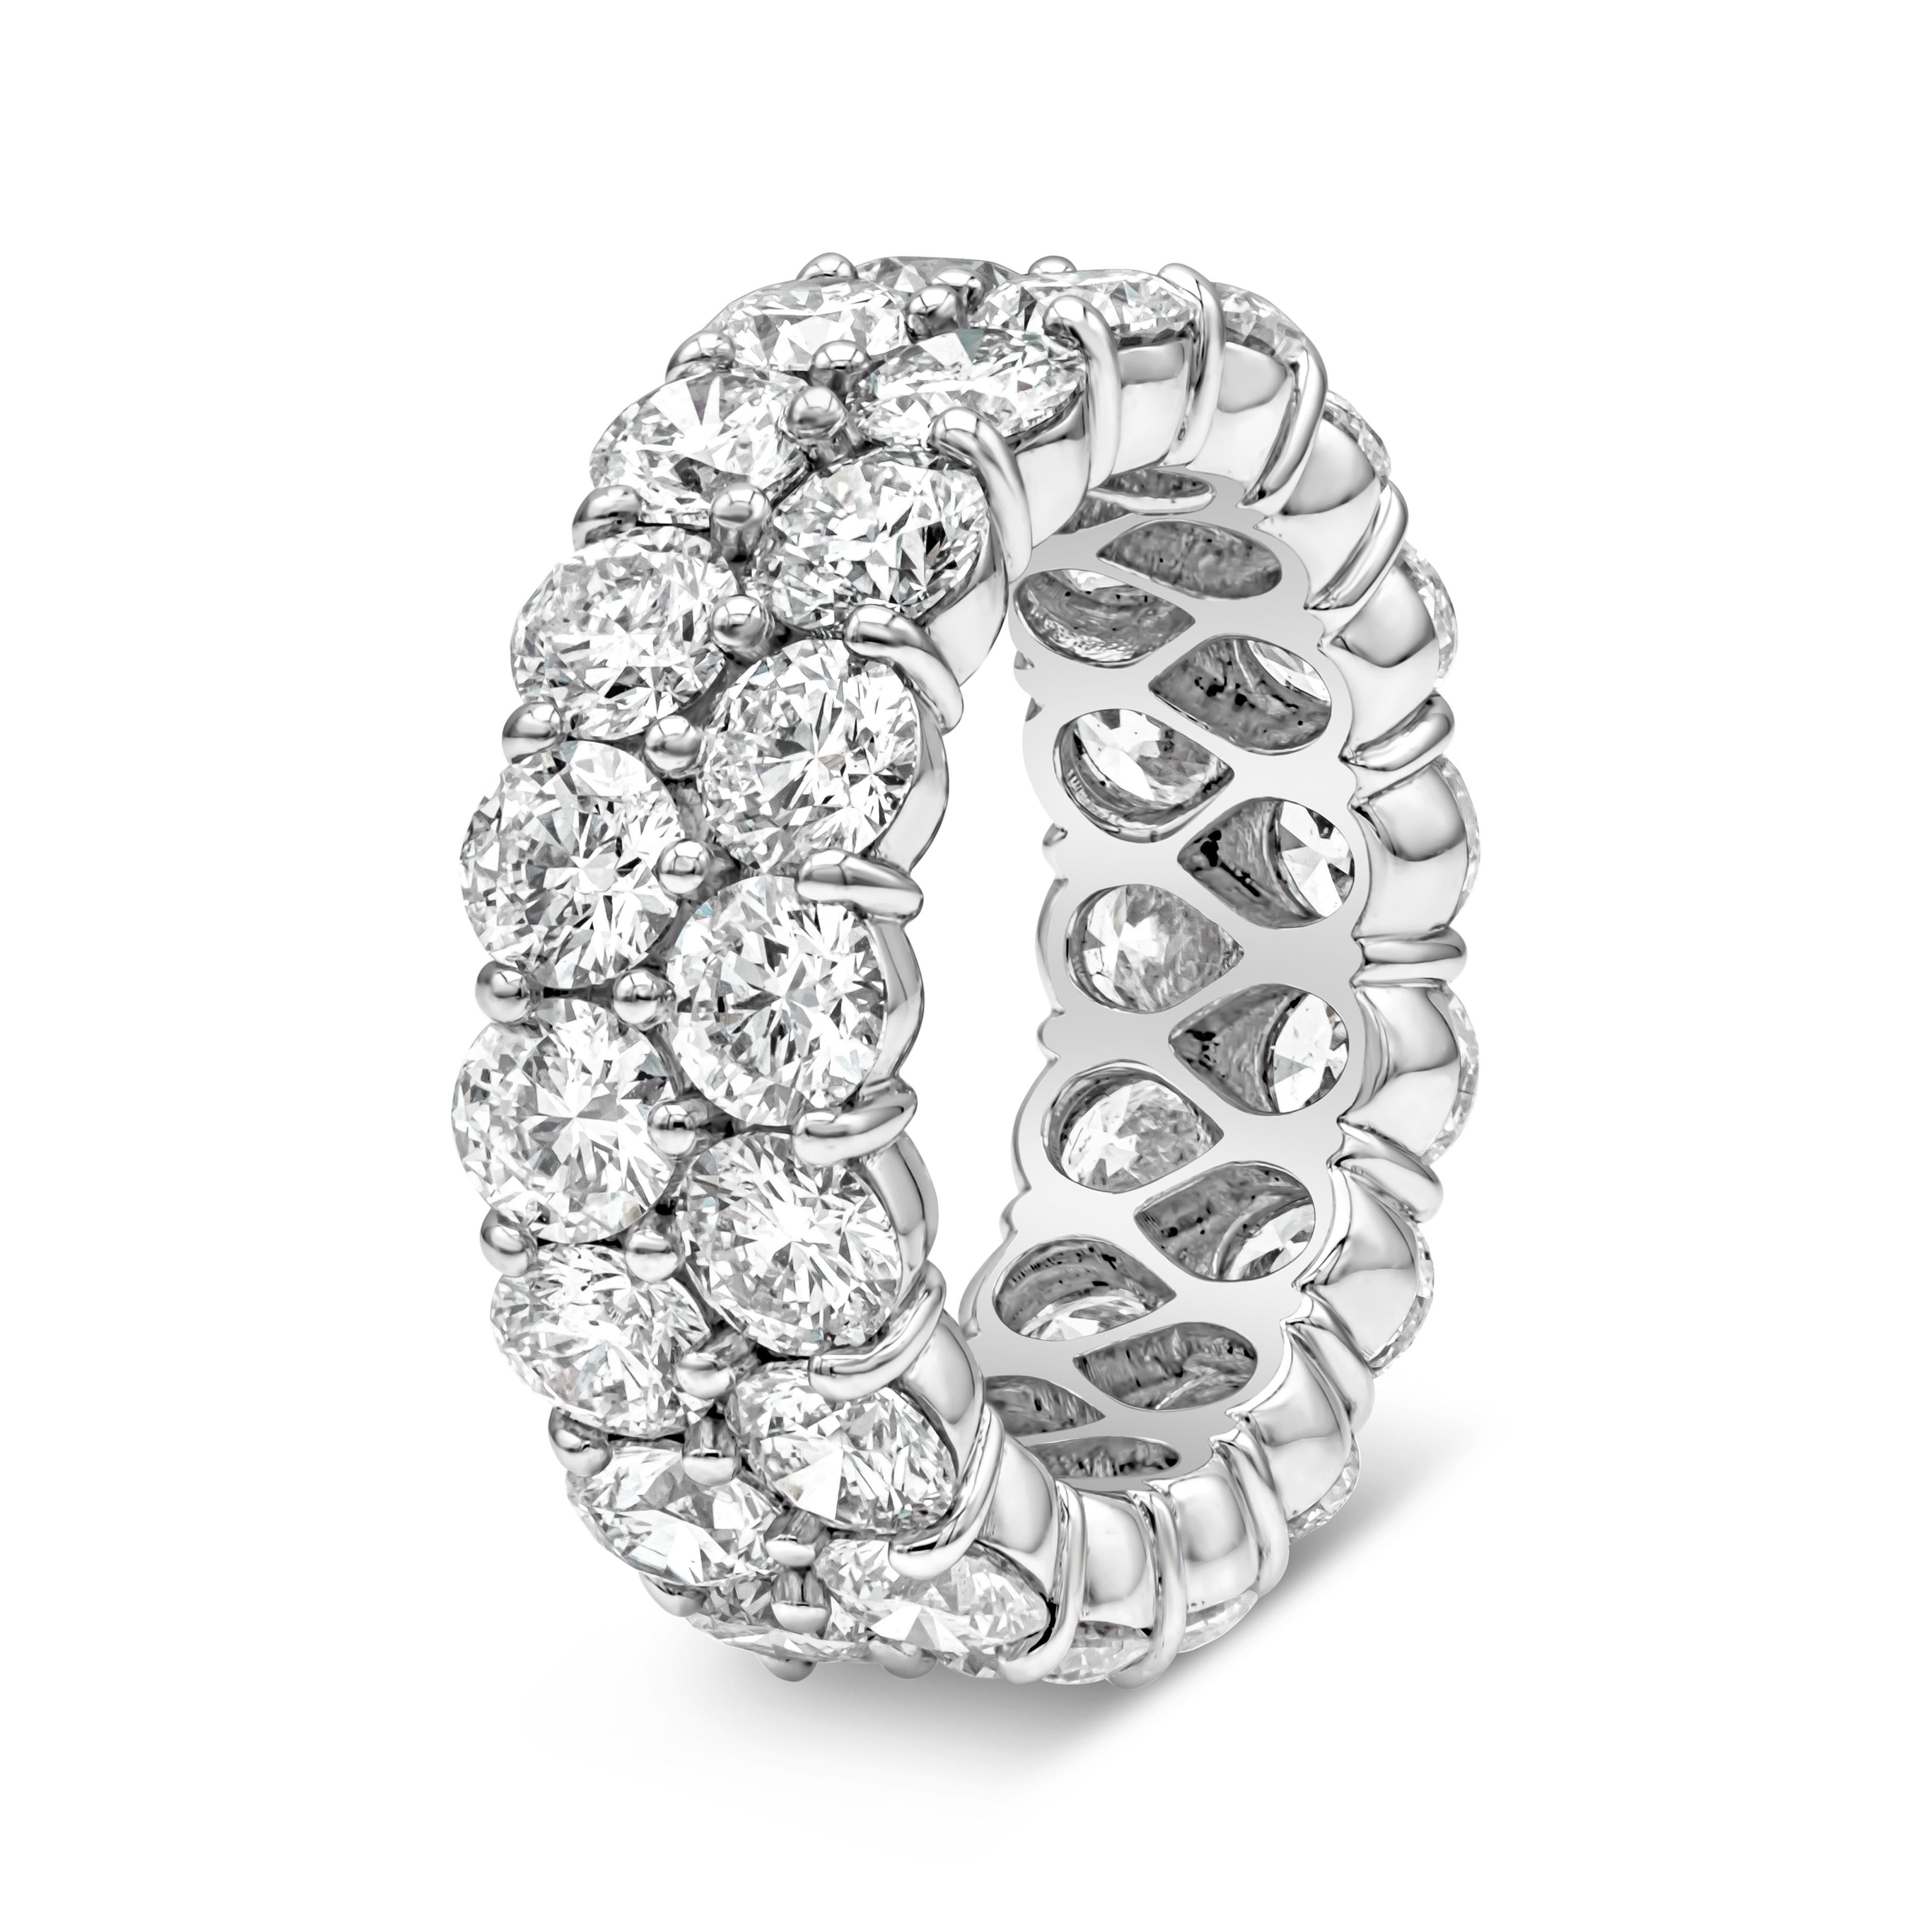 Gorgeous eternity wedding band set with two rows of brilliant round diamonds in a double shared prong setting. Perfectly matched round diamonds weighing 8.39 carats total, F Color and SI in Clarity. Made with Platinum, Size 6.5 US resizable upon